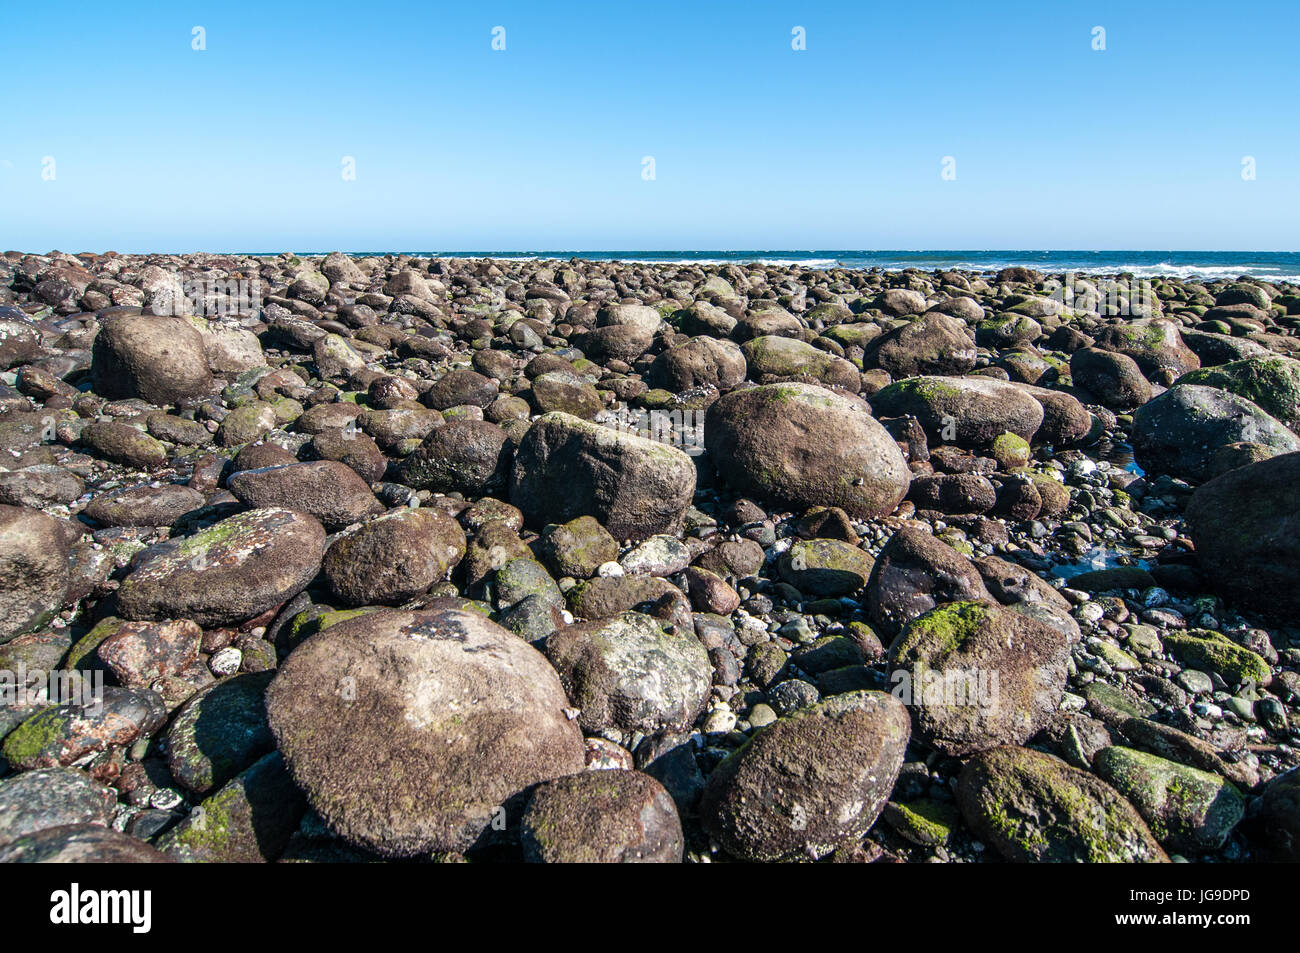 Beach with cobbles, Salinas del Matorral, Gran Canaria, Canary Islands, Spain Stock Photo